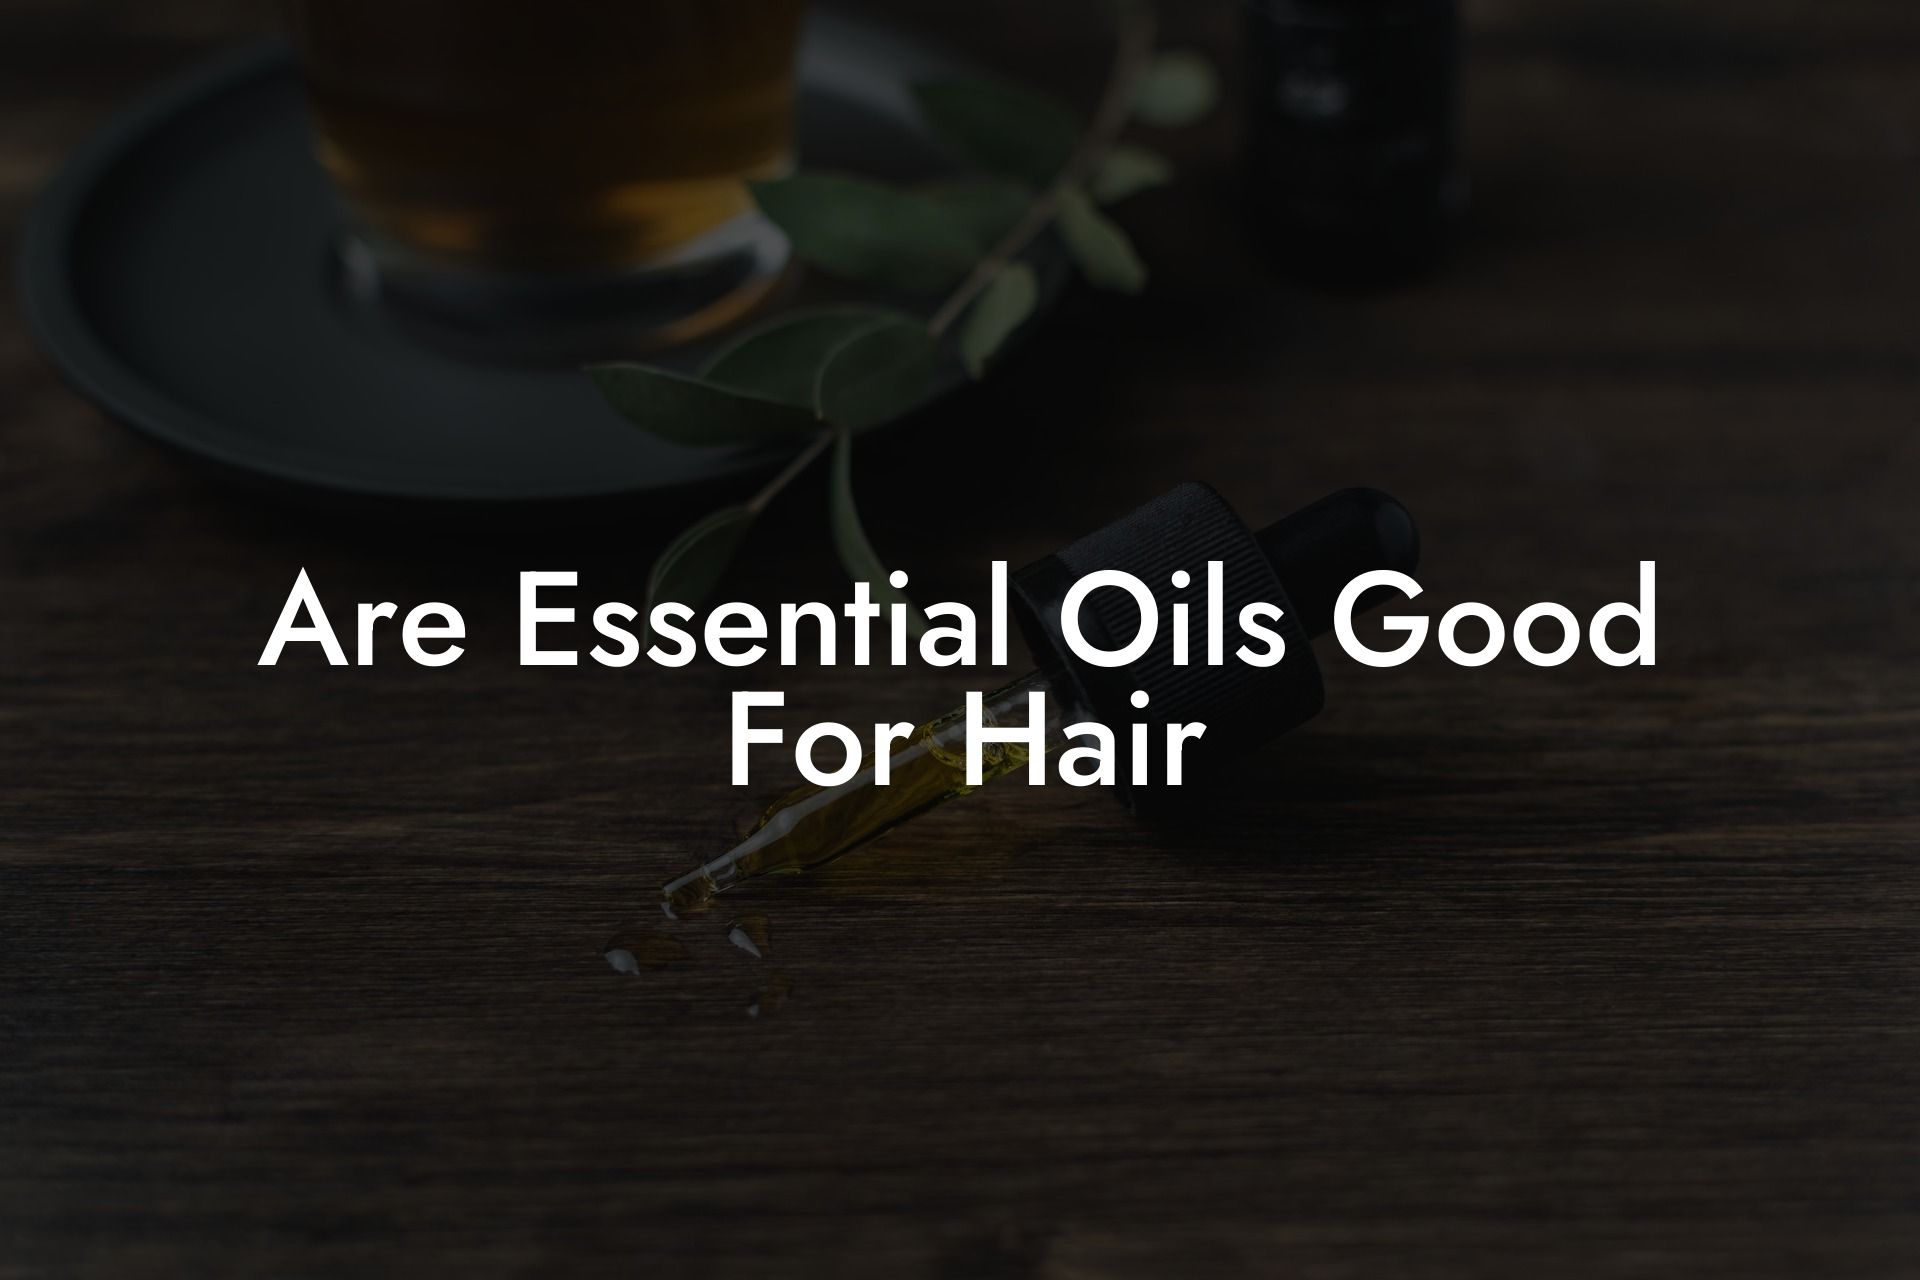 Are Essential Oils Good For Hair